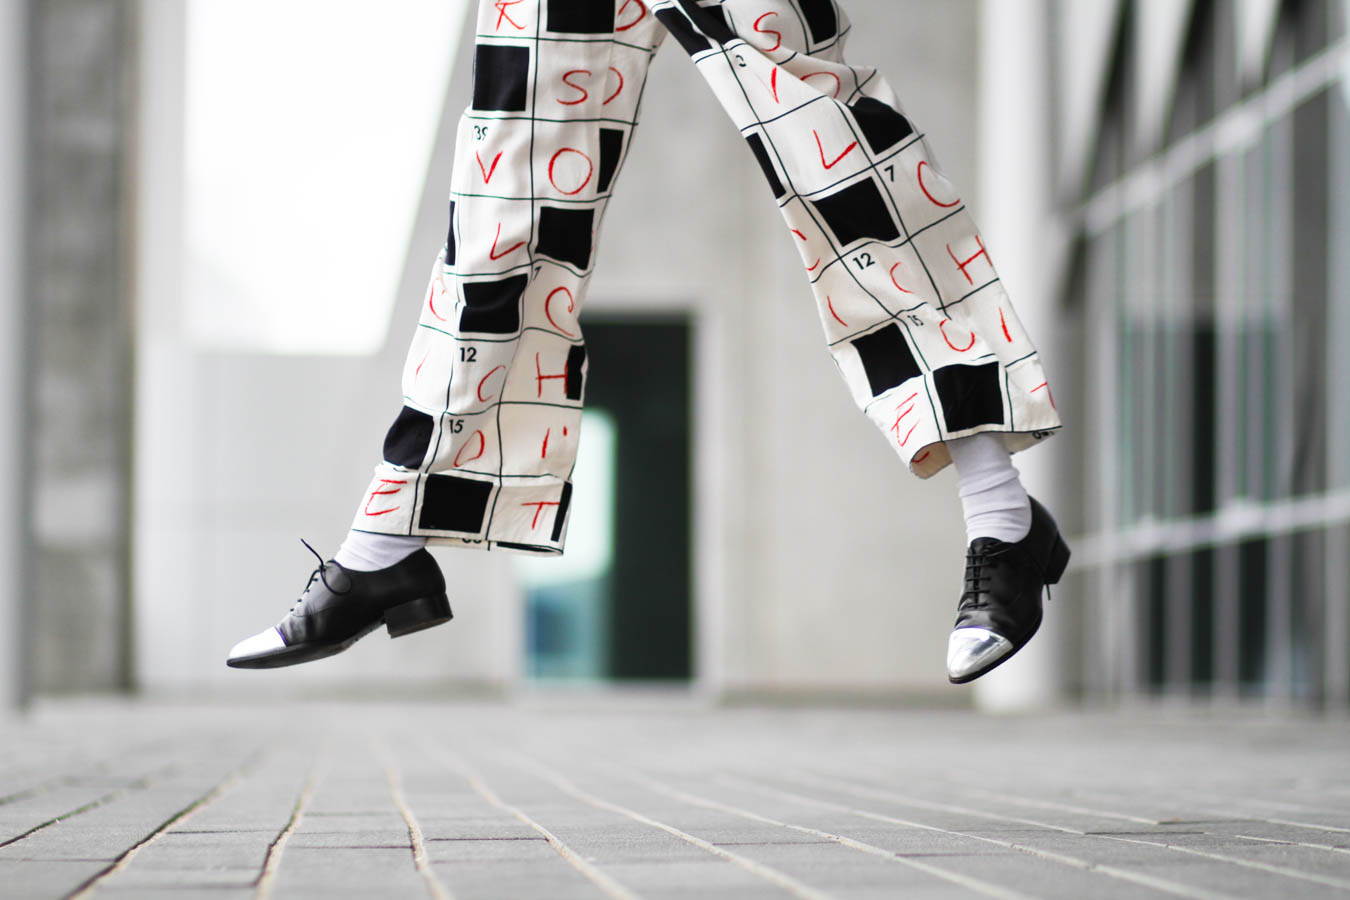 outfit october nemesis babe cross word puzzle trousers moschino heart margiela hm-5